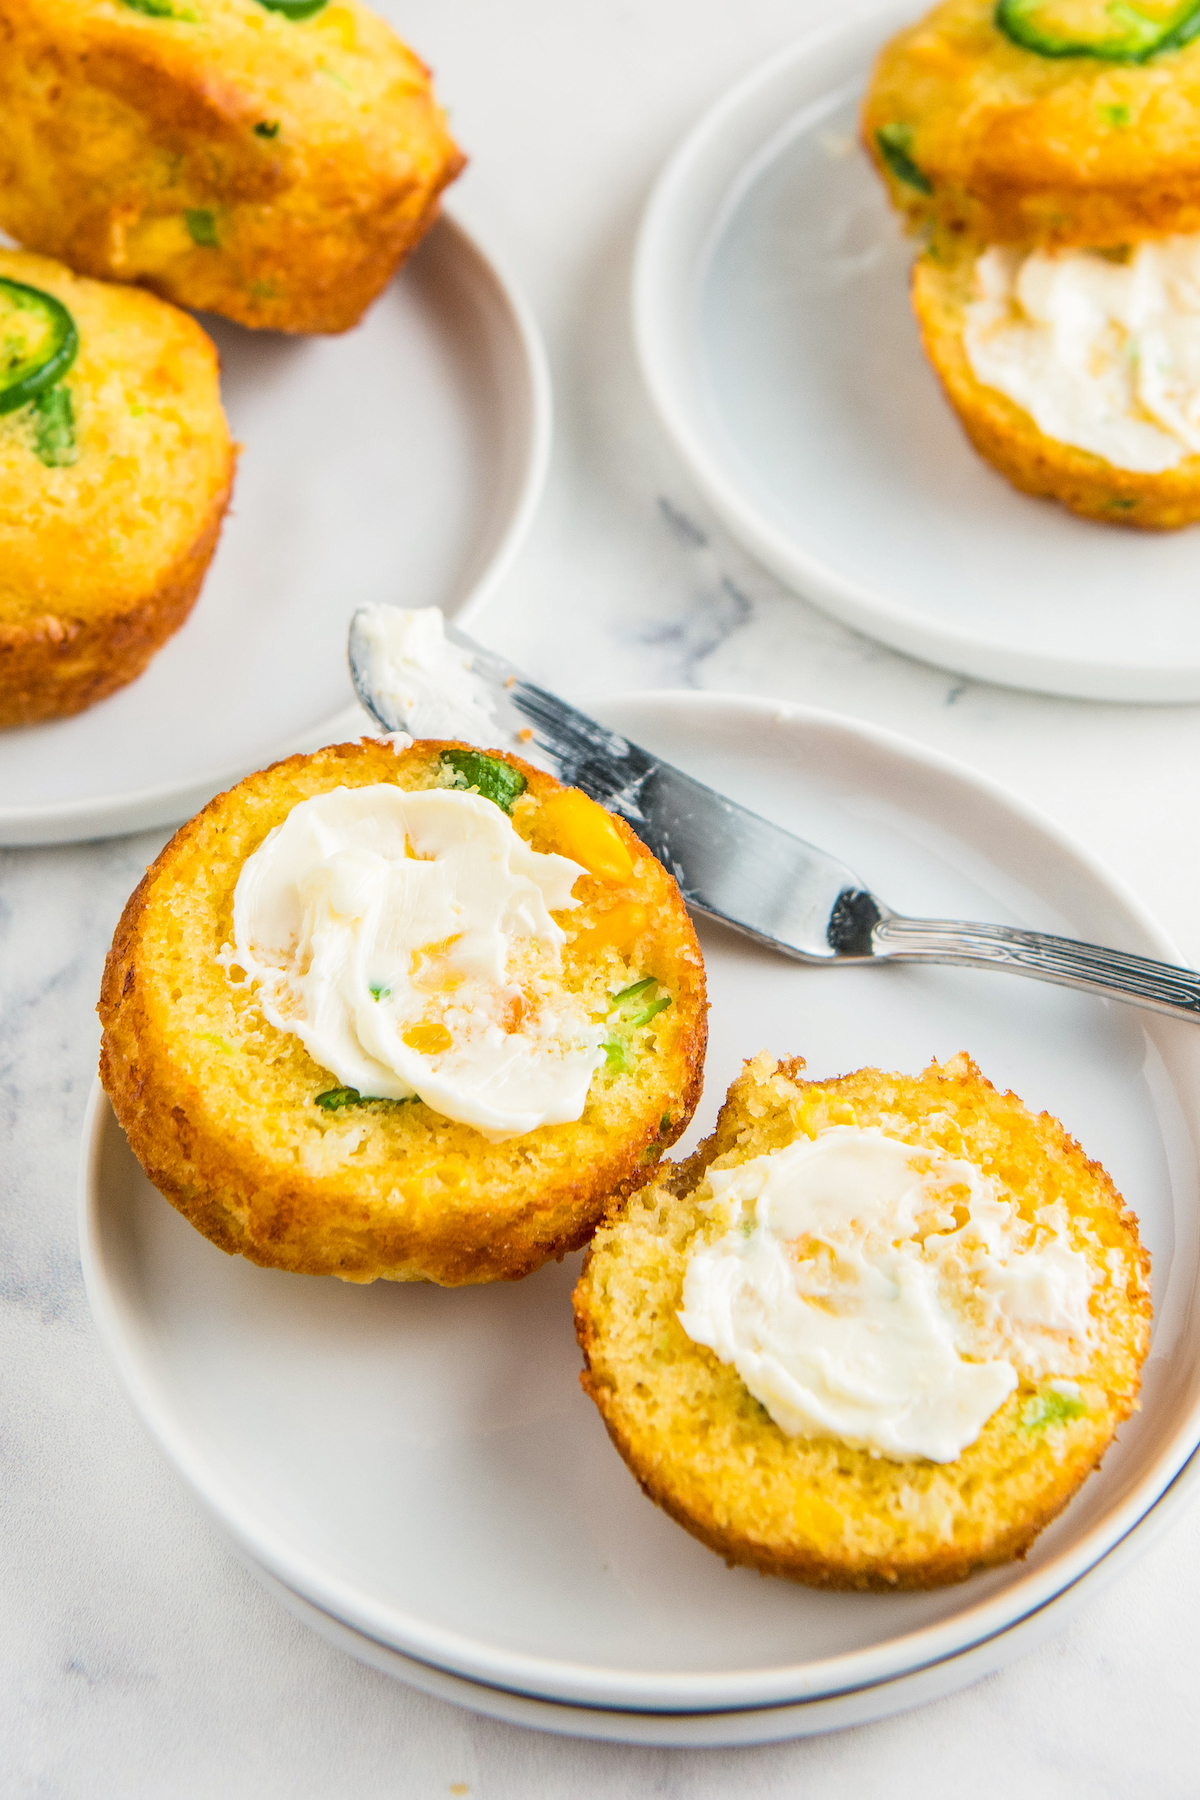 A corn muffin split and spread with butter on a small dessert plate.